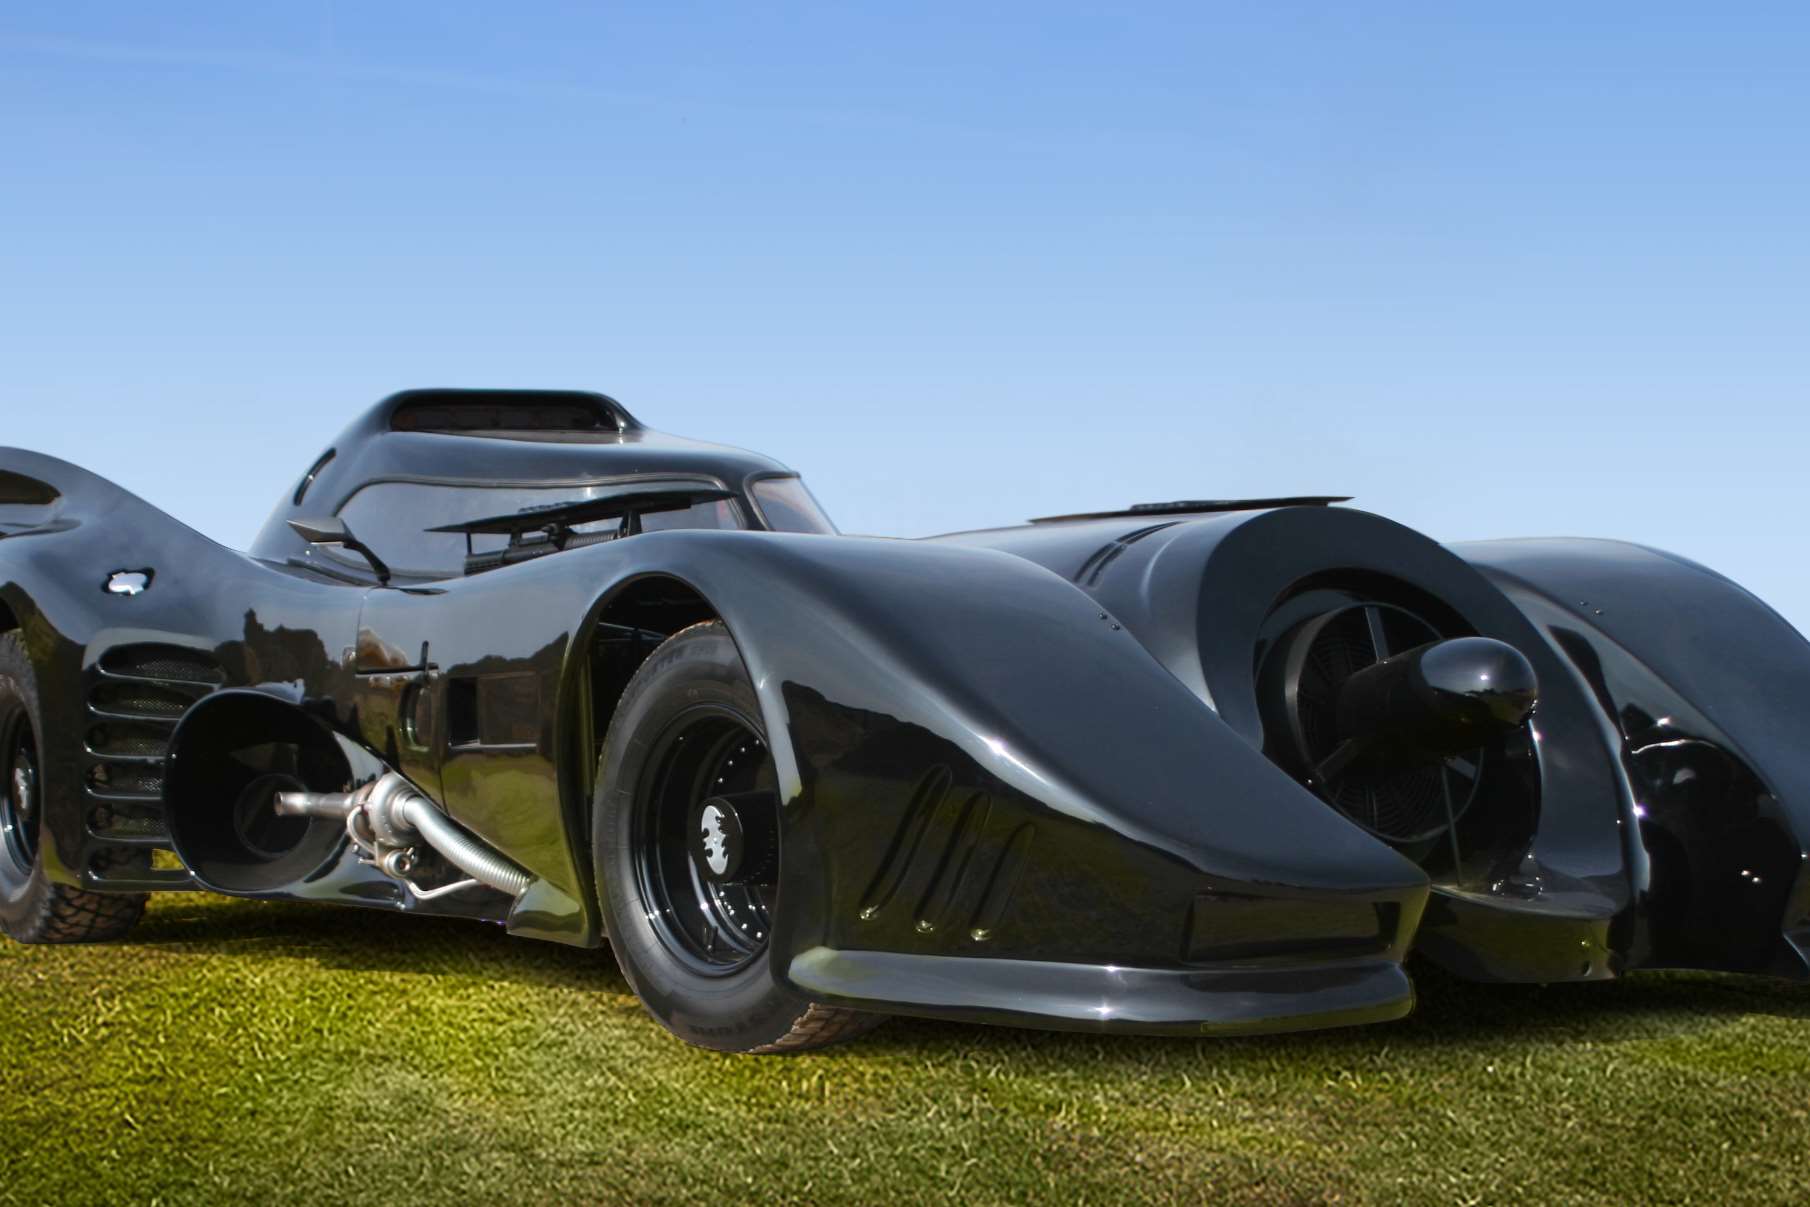 Calling all comic book fans! Batman's Batmobile will be part of this weekend's displays